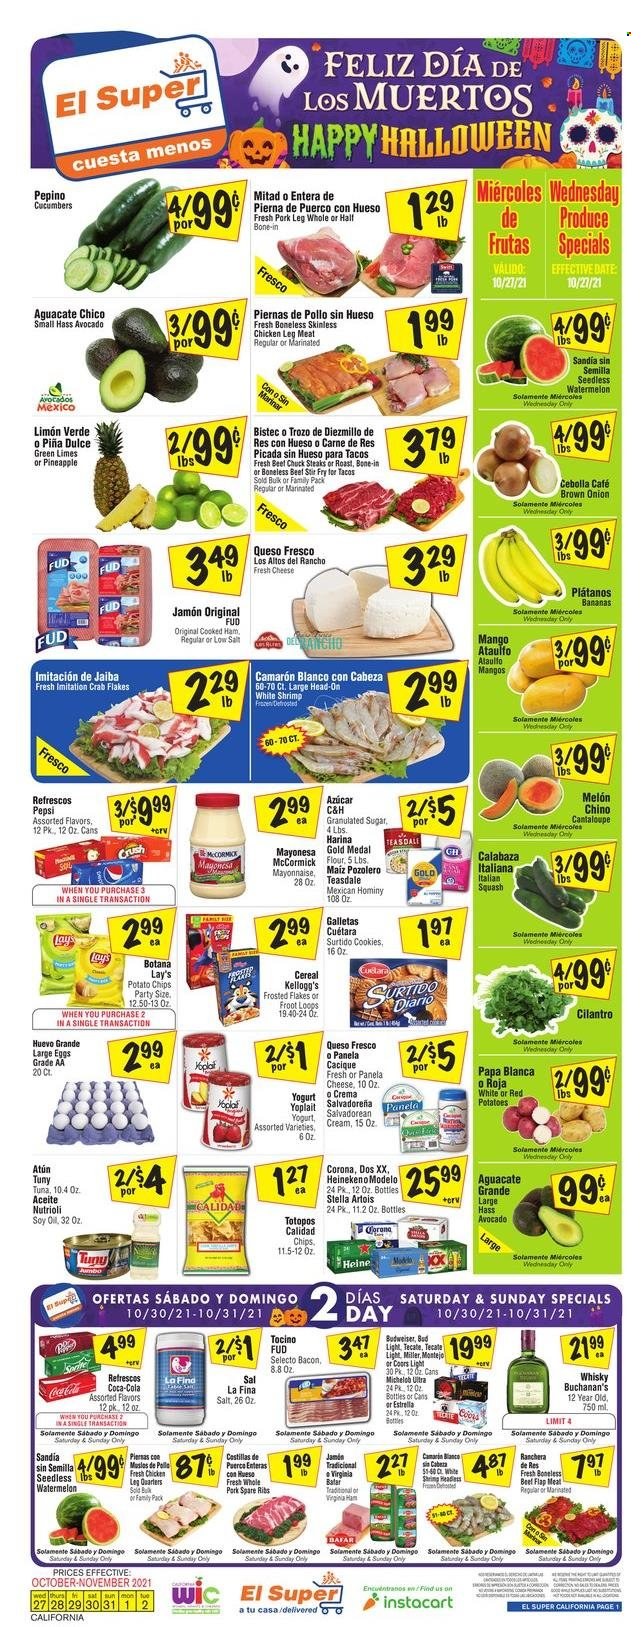 thumbnail - El Super Flyer - 10/27/2021 - 11/02/2021 - Sales products - cantaloupe, cucumber, red potatoes, avocado, bananas, limes, mango, watermelon, crab, shrimps, bacon, cooked ham, ham, virginia ham, queso fresco, cheese, Panela cheese, yoghurt, Yoplait, large eggs, cookies, Kellogg's, potato chips, chips, Lay’s, granulated sugar, sugar, cereals, Frosted Flakes, cilantro, Coca-Cola, Pepsi, whisky, beer, Bud Light, Corona Extra, Miller, Modelo, chicken legs, steak, pork meat, pork ribs, pork spare ribs, pork leg, Budweiser, Stella Artois, melons, Coors, Michelob. Page 1.